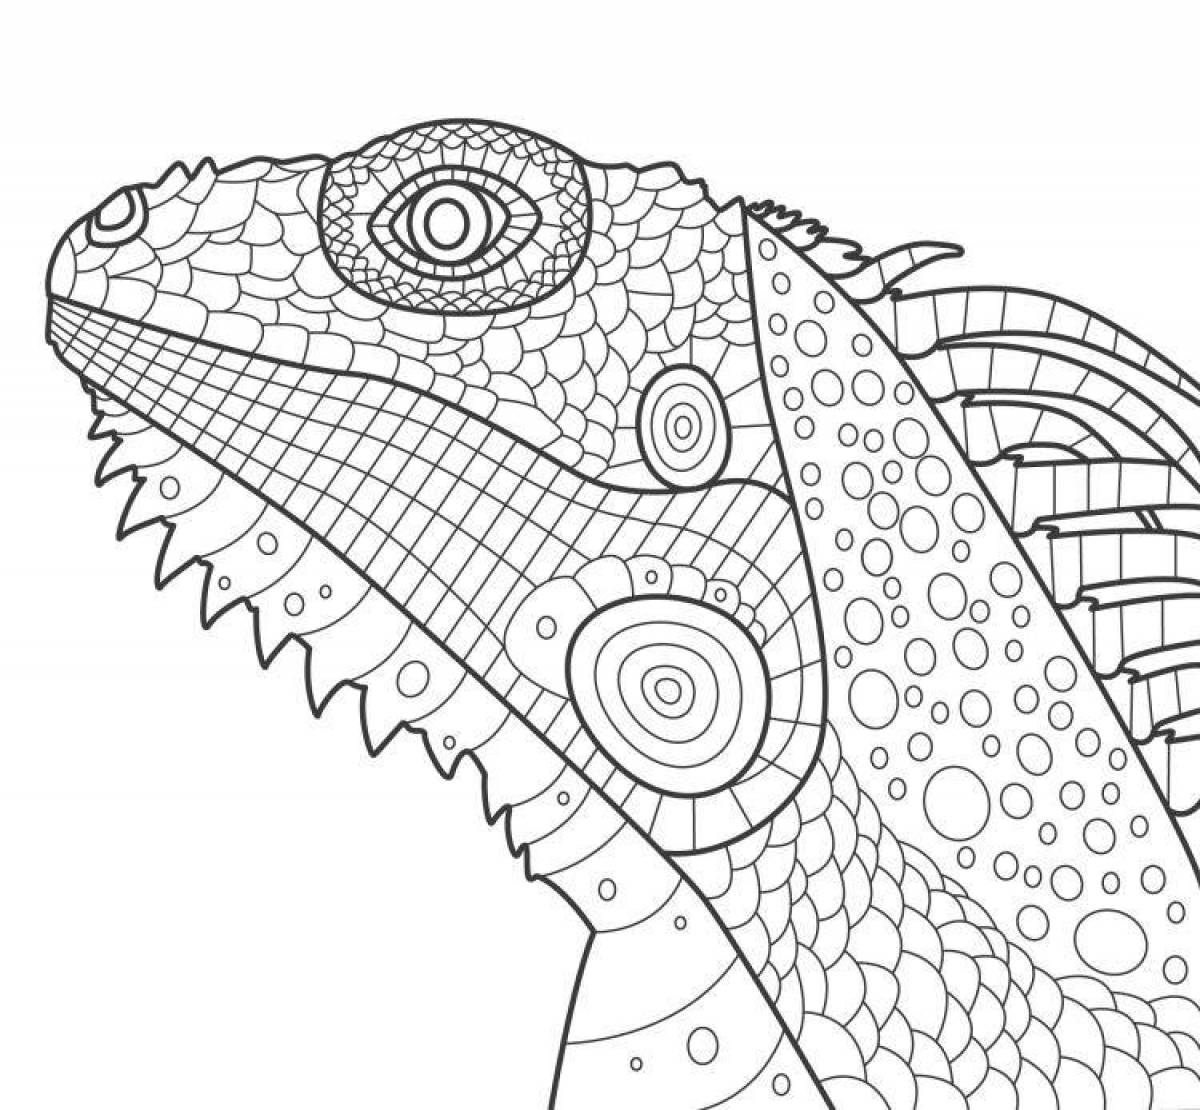 Adorable iguana coloring page